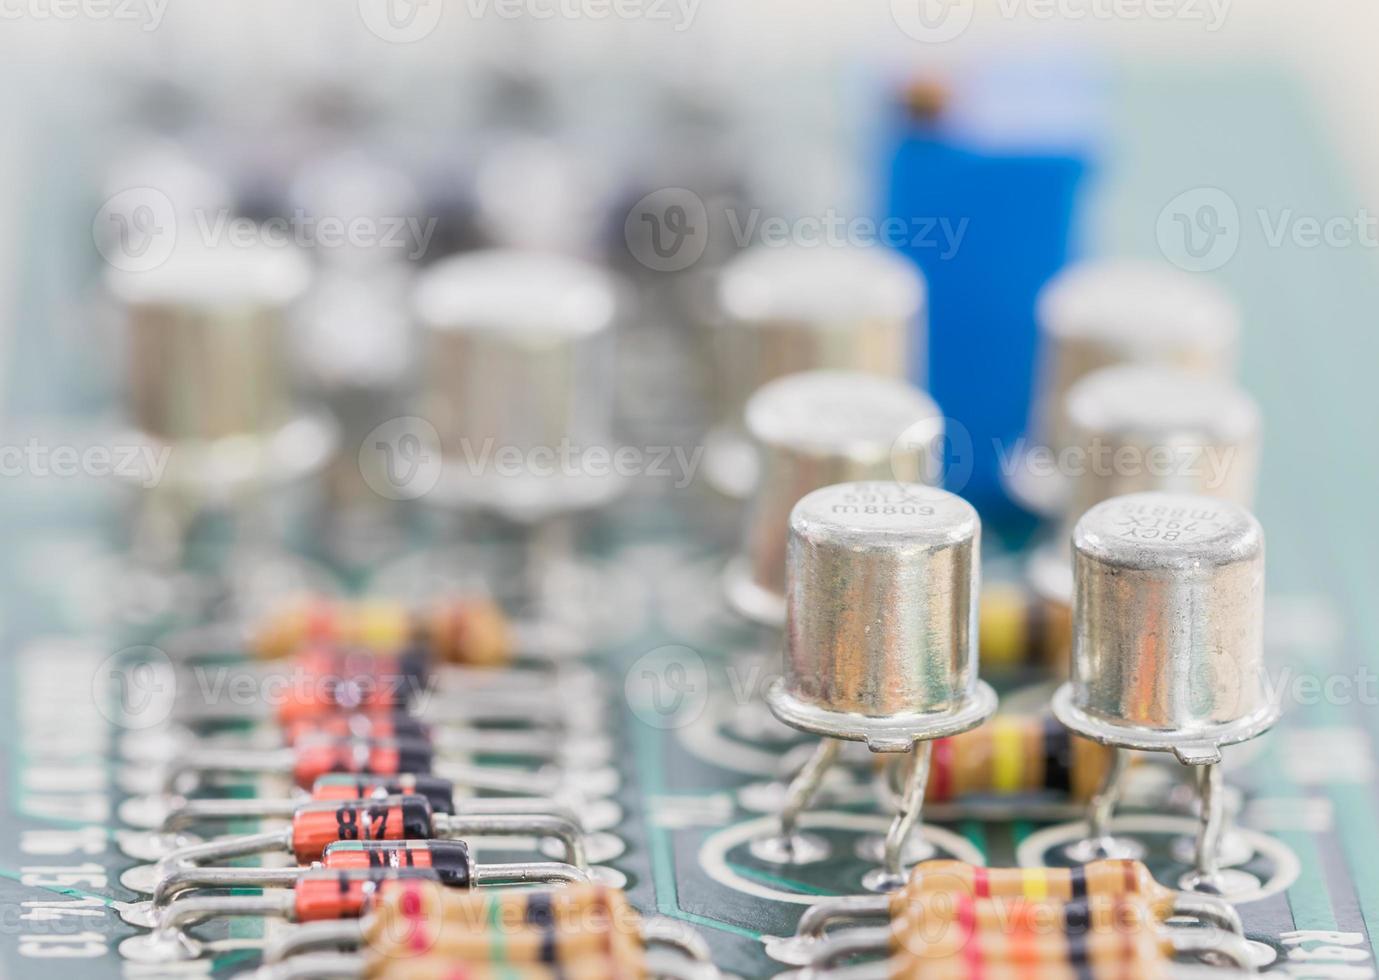 Condensers and Resistor assembly on the circuit board photo